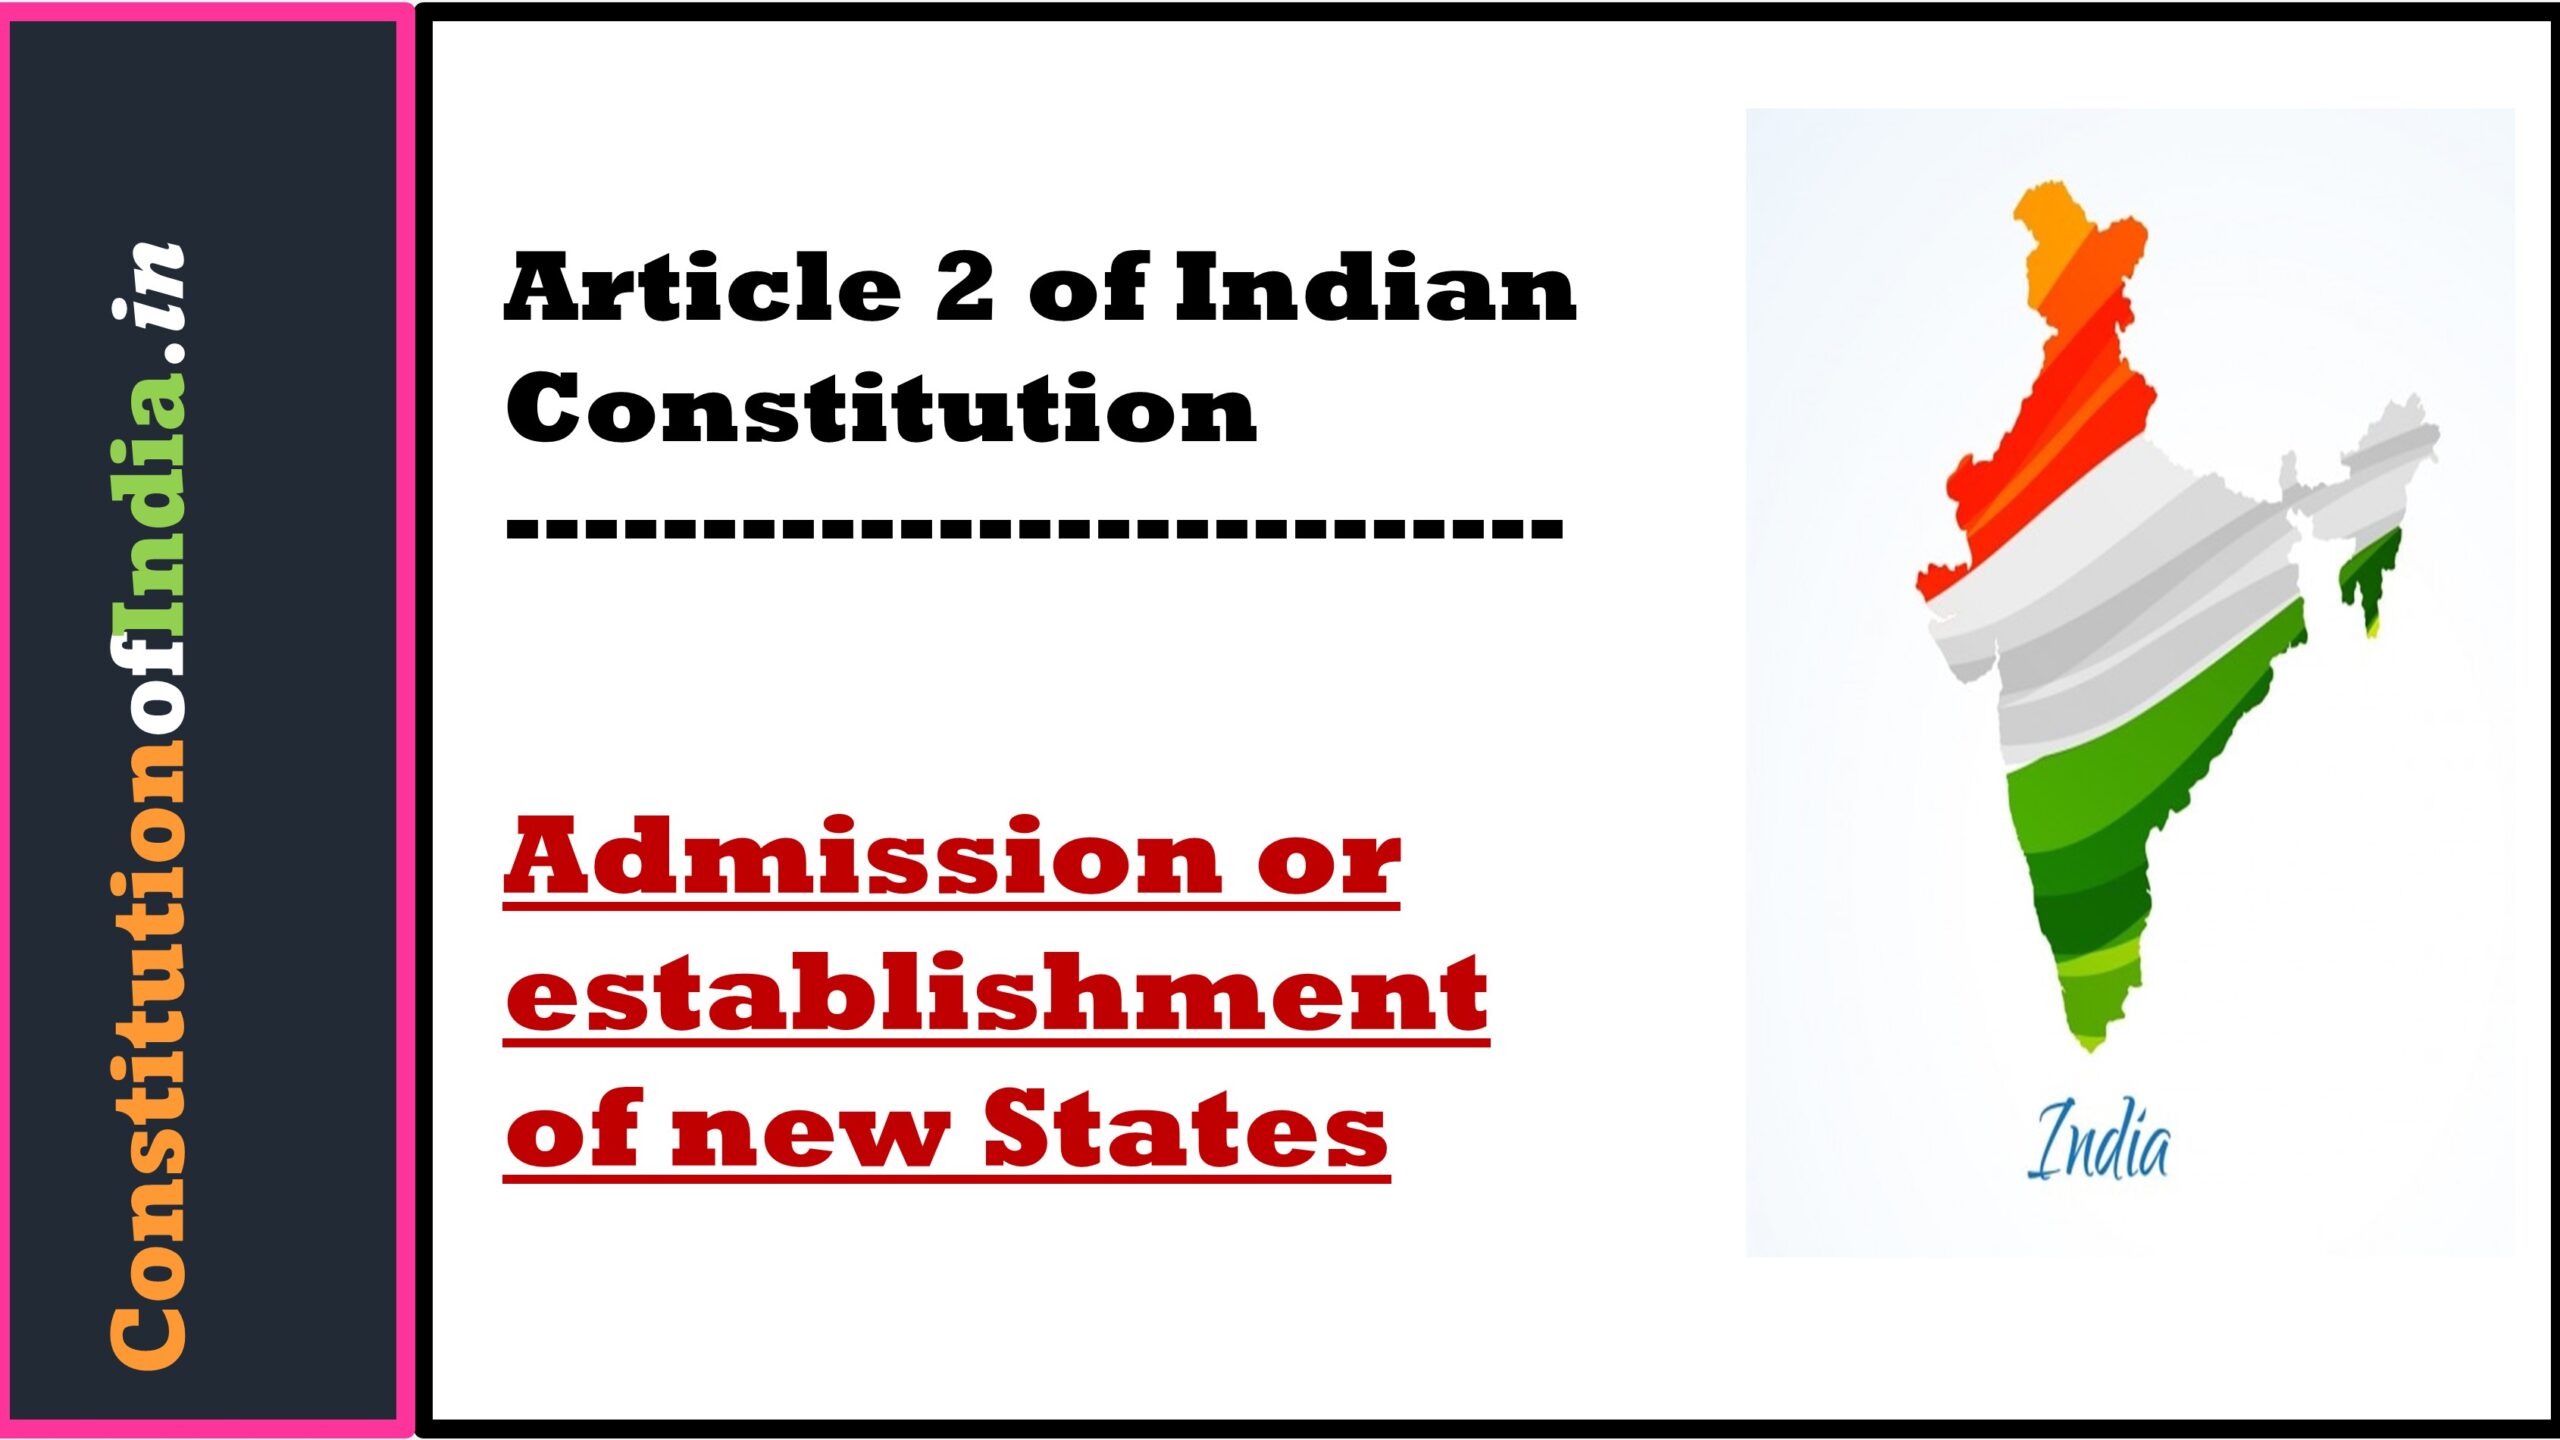 Article 2 of Indian Constitution